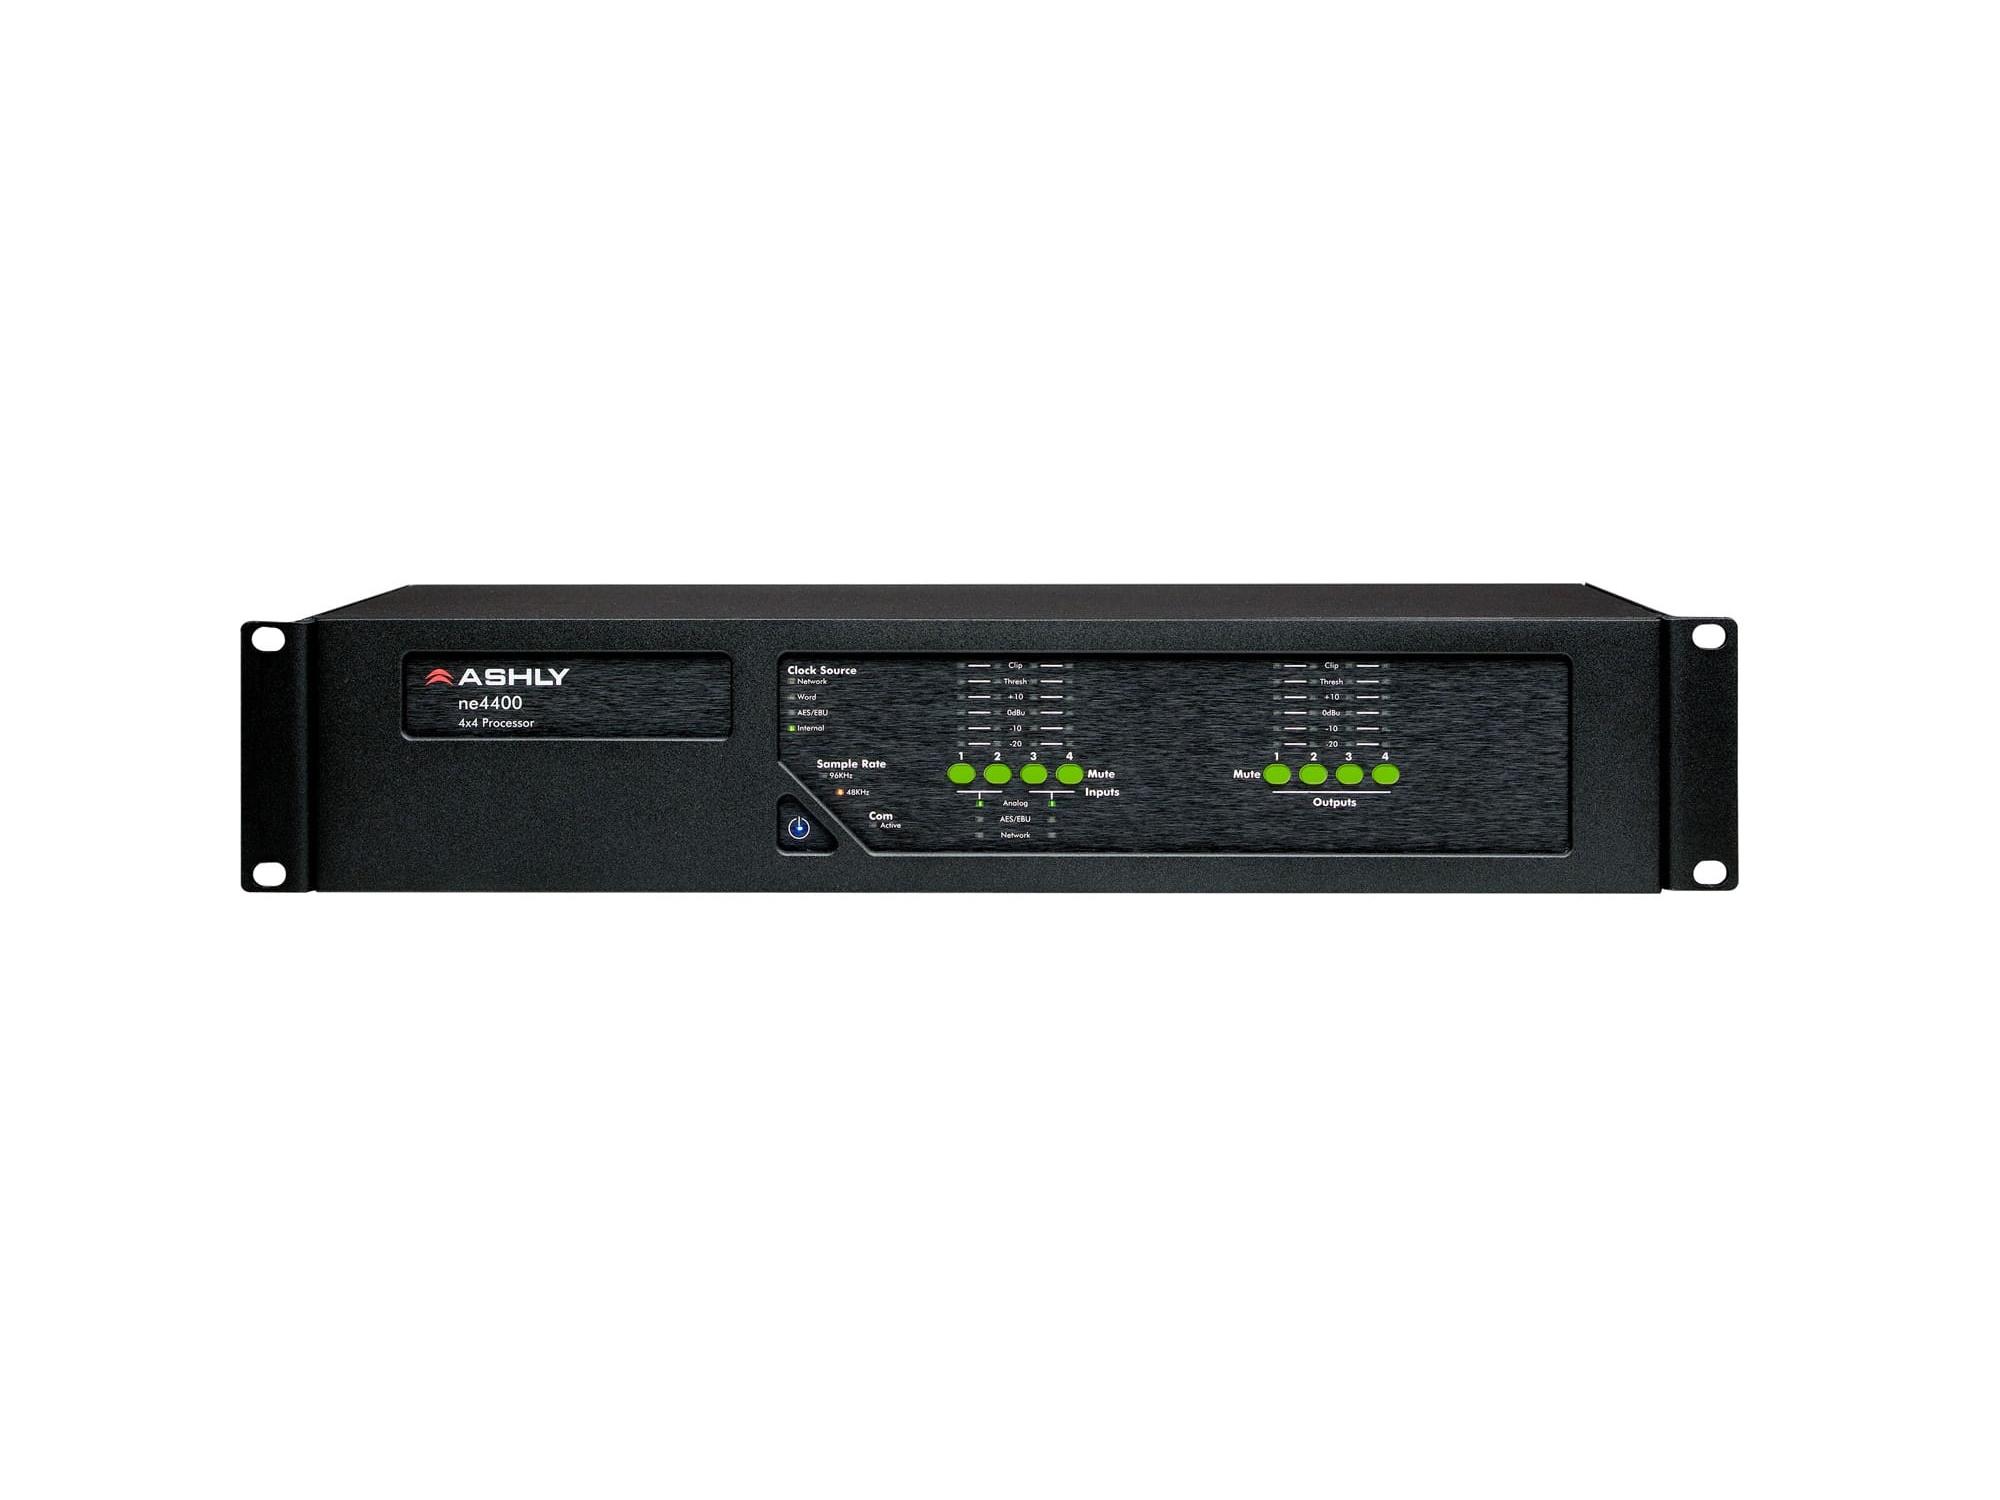 ne4400dst 4x4 Protea DSP Audio System Processor with 4-Ch AES3 Inputs/Outputs and Dante Card by Ashly